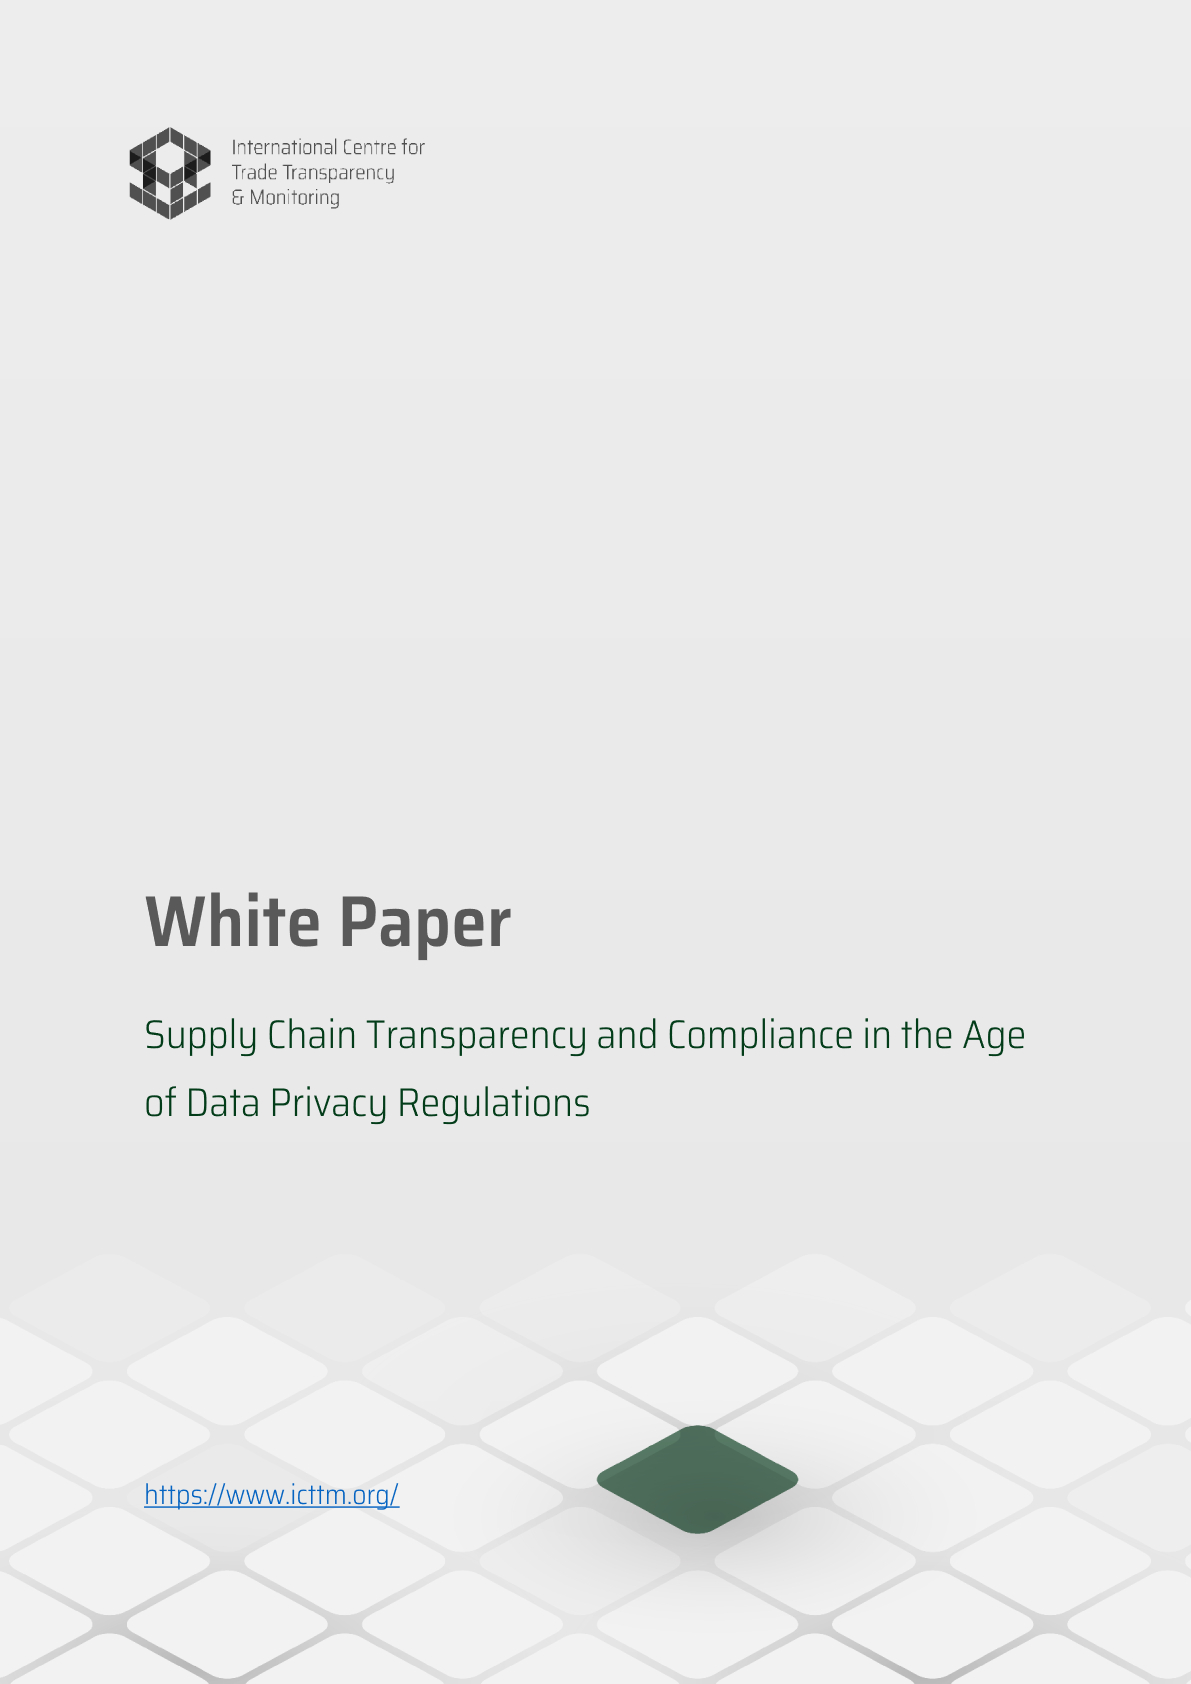 Supply Chain Transparency and Compliance in the Age of Data Privacy Regulations